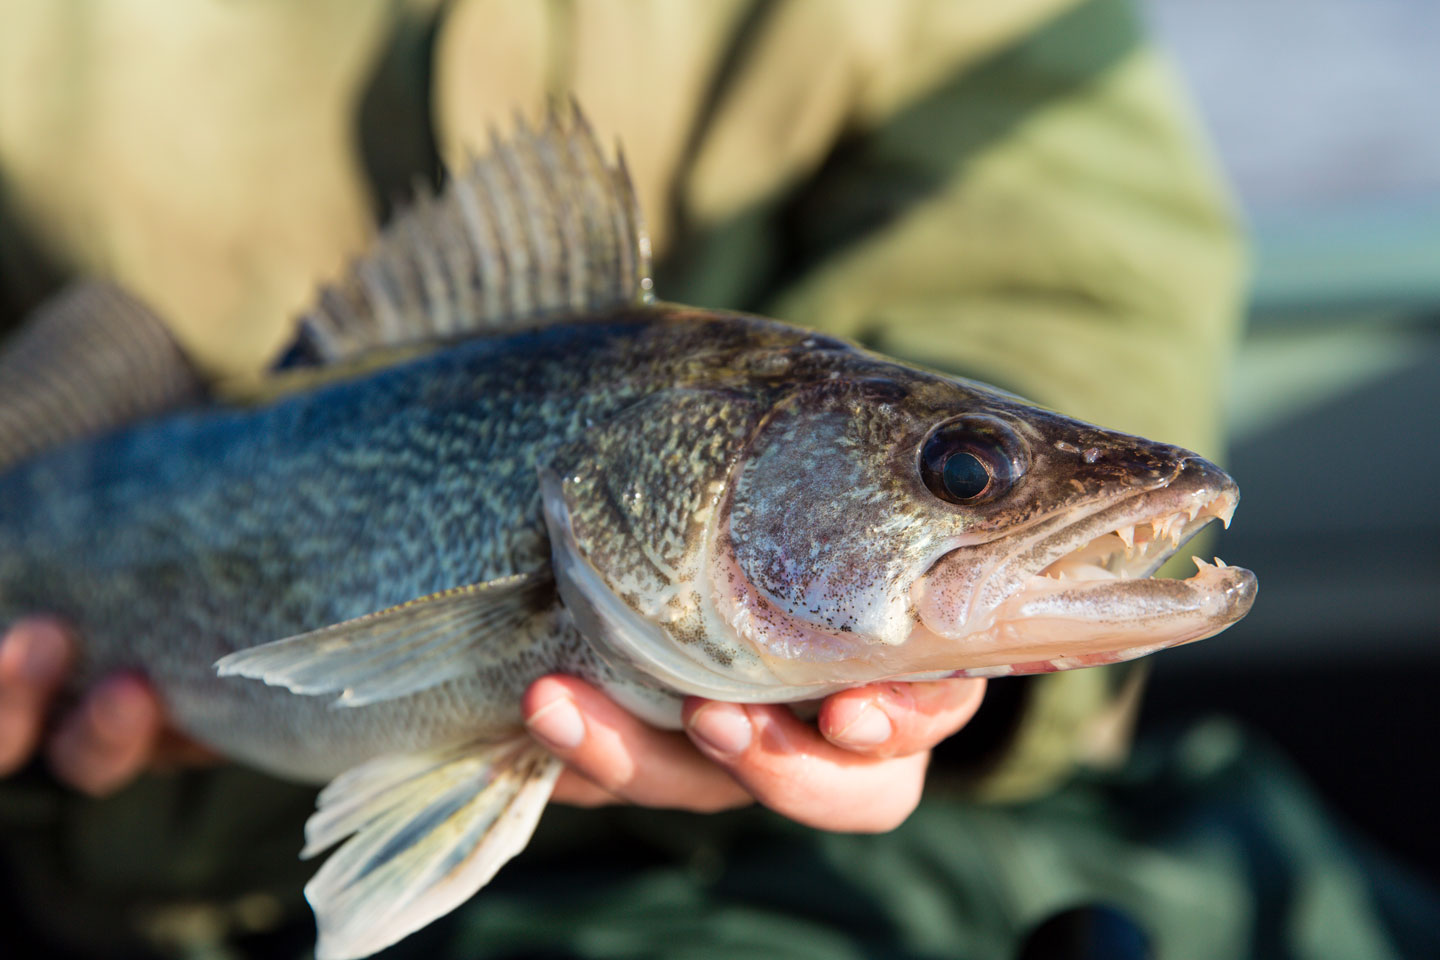 Join Game and Parks' virtual fisheries discussion